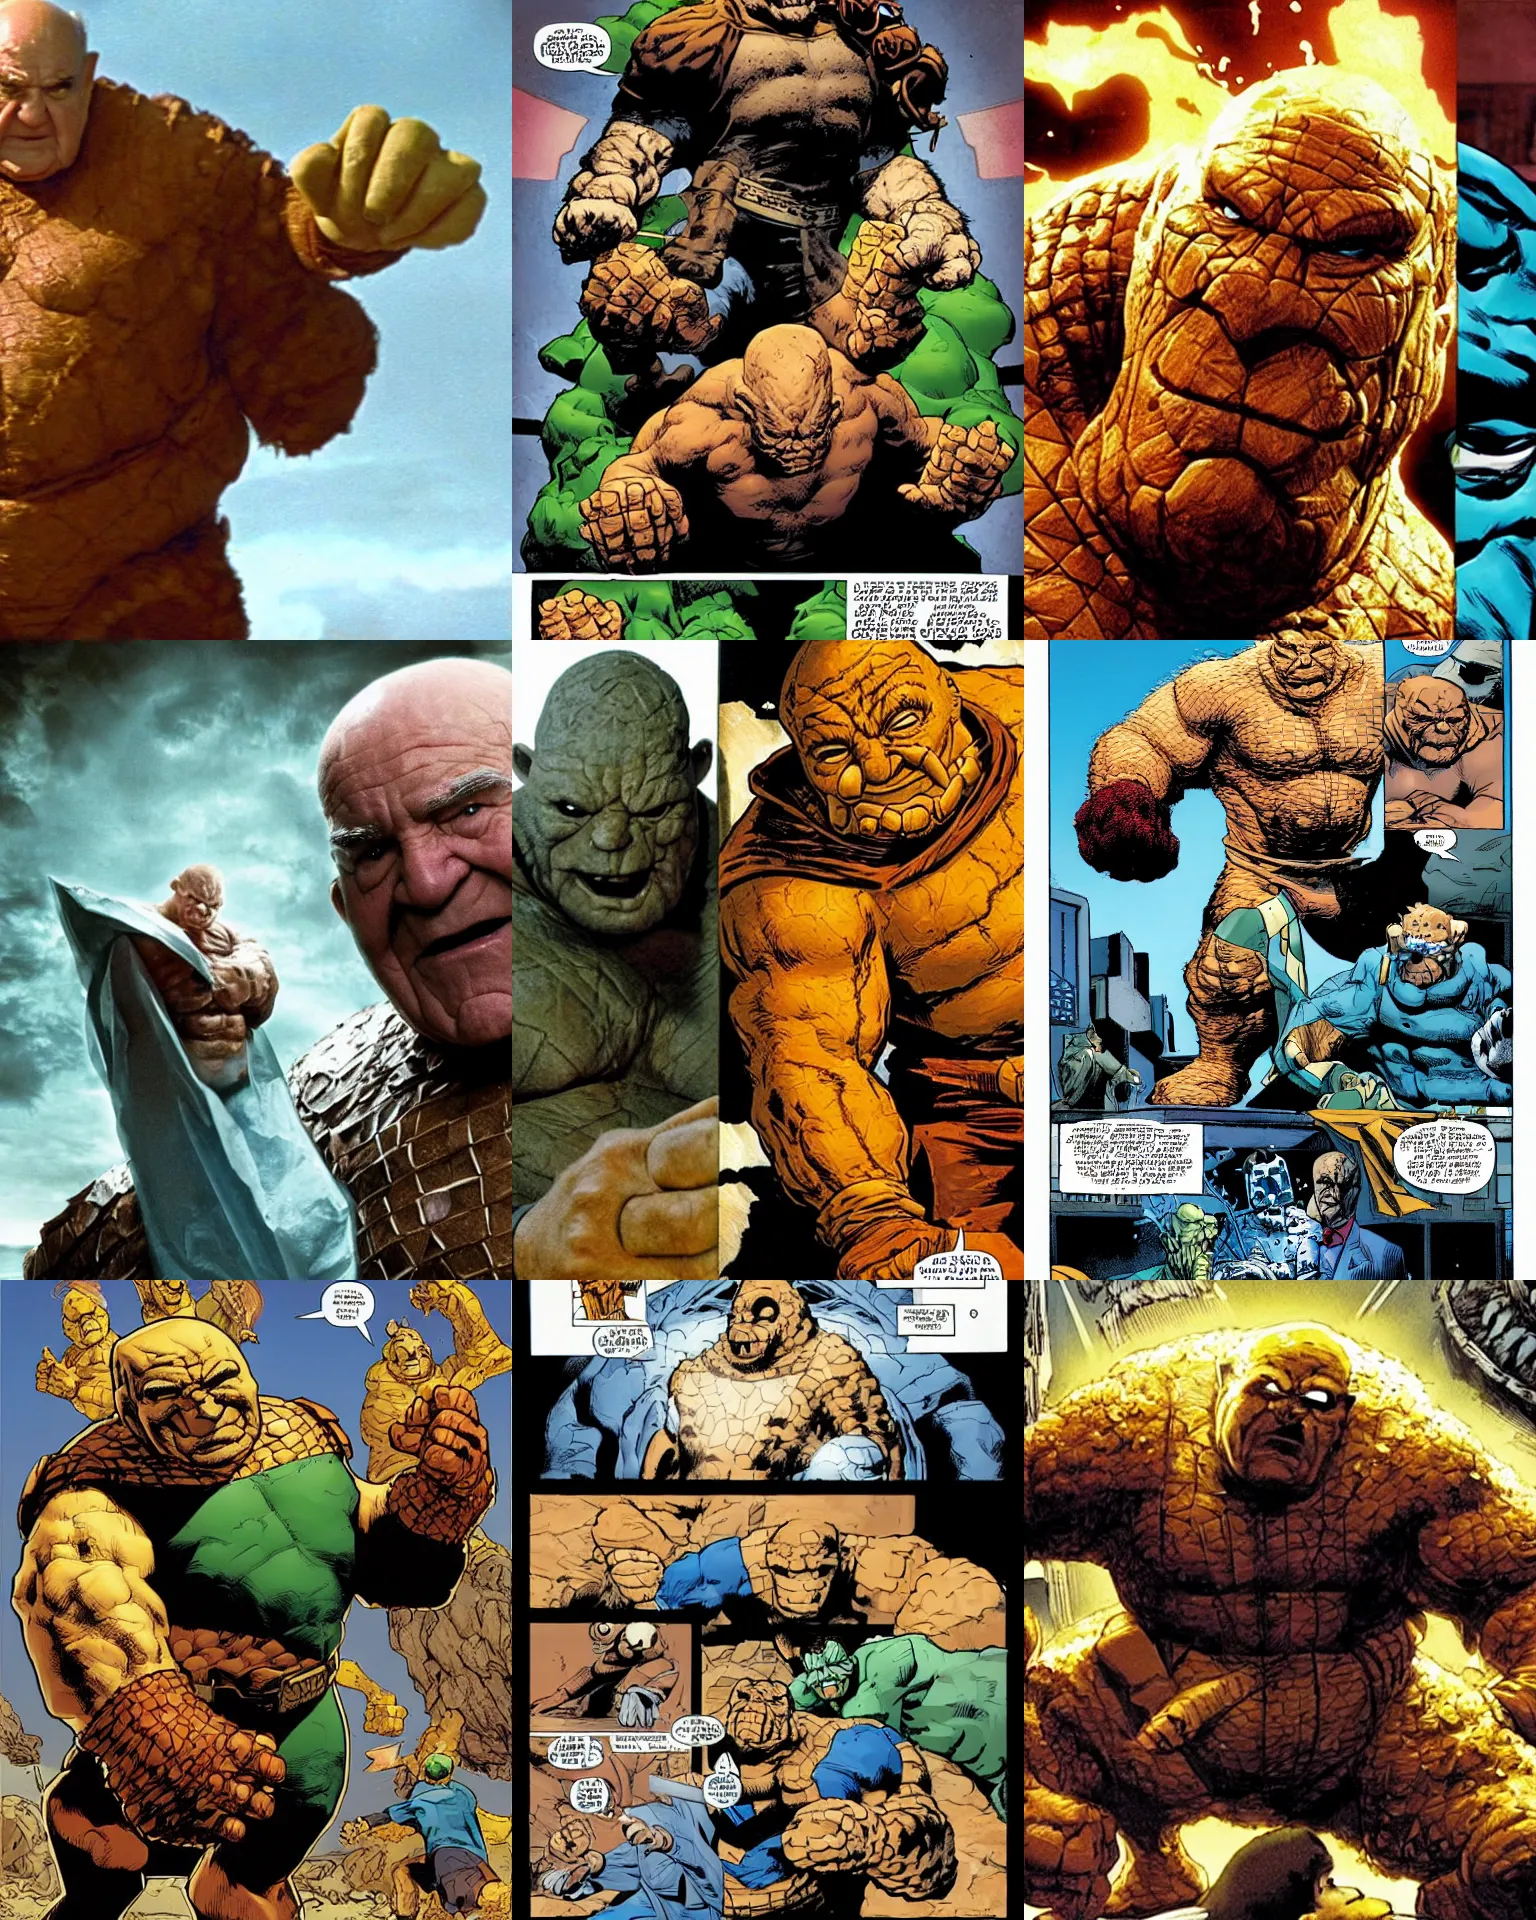 Prompt: Ed Asner starring as Ben Grimm, The Thing from The Fantastic Four Movie, battles the Doctor Doom, Color, Modern